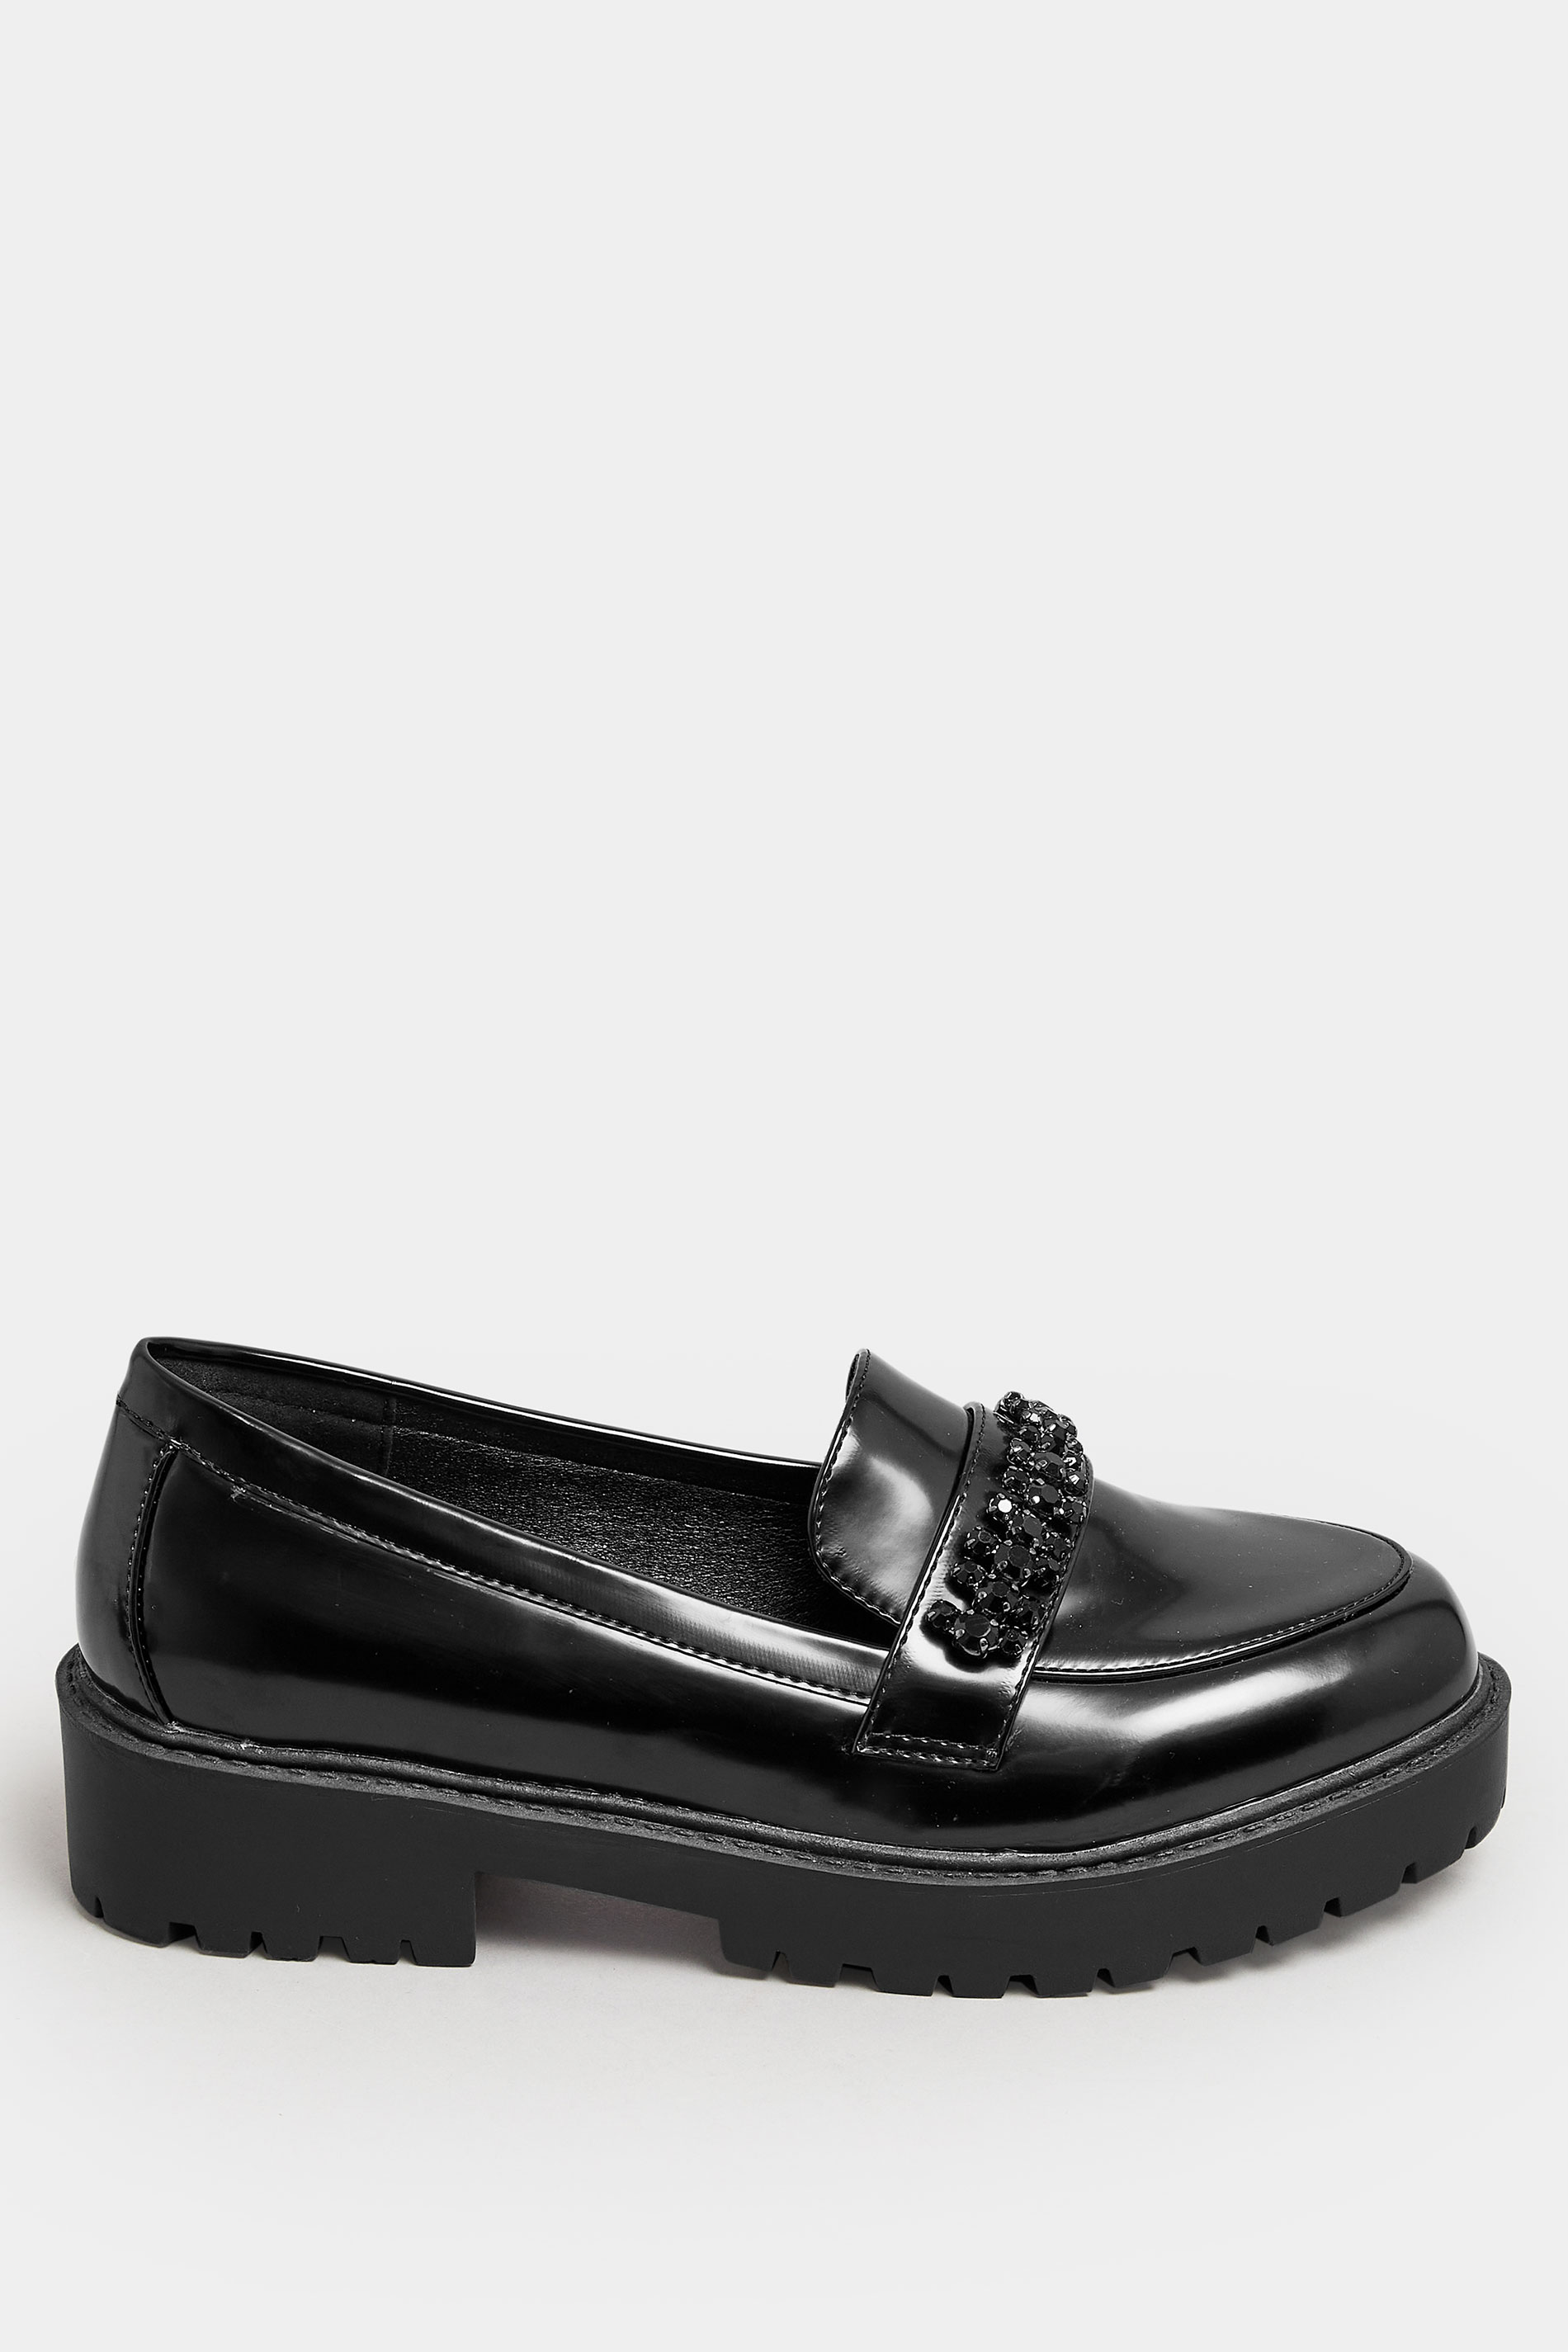 LIMITED COLLECTION Black Diamante Chunky Loafers In Extra Wide EEE Fit | Yours Clothing 3